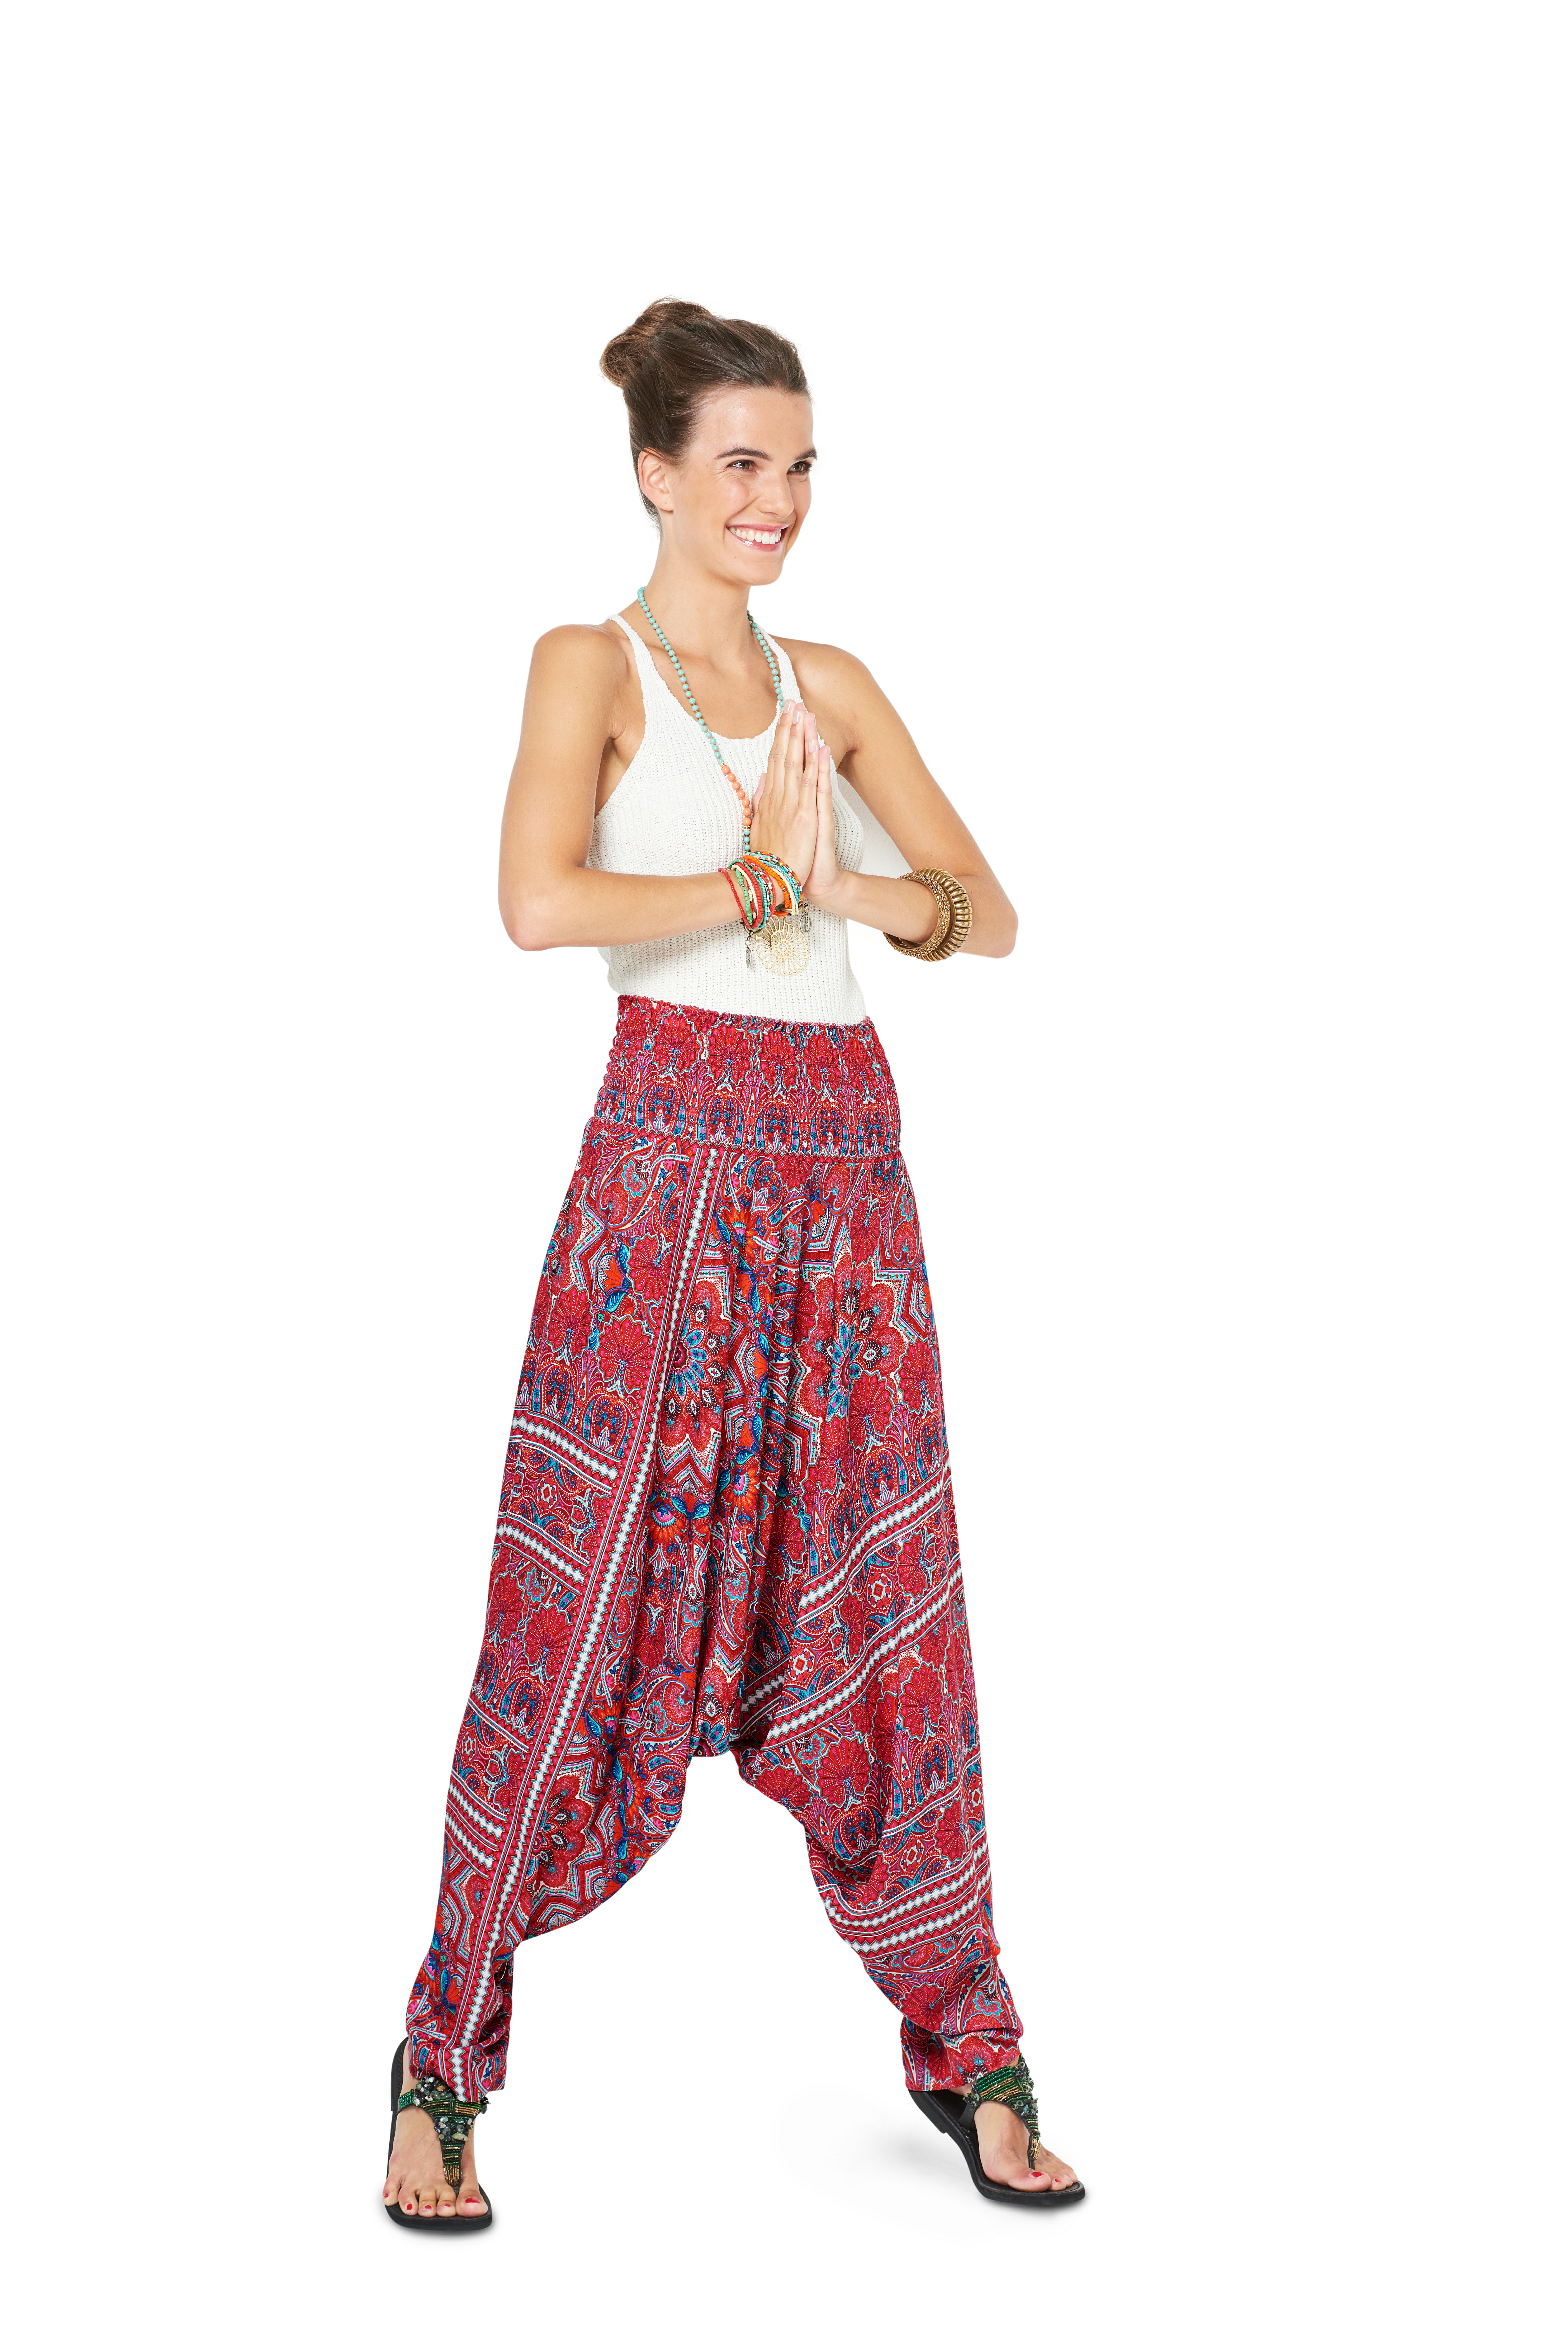 Baby harem pants sewing pattern PDF, those are cute and comfy baggy pants